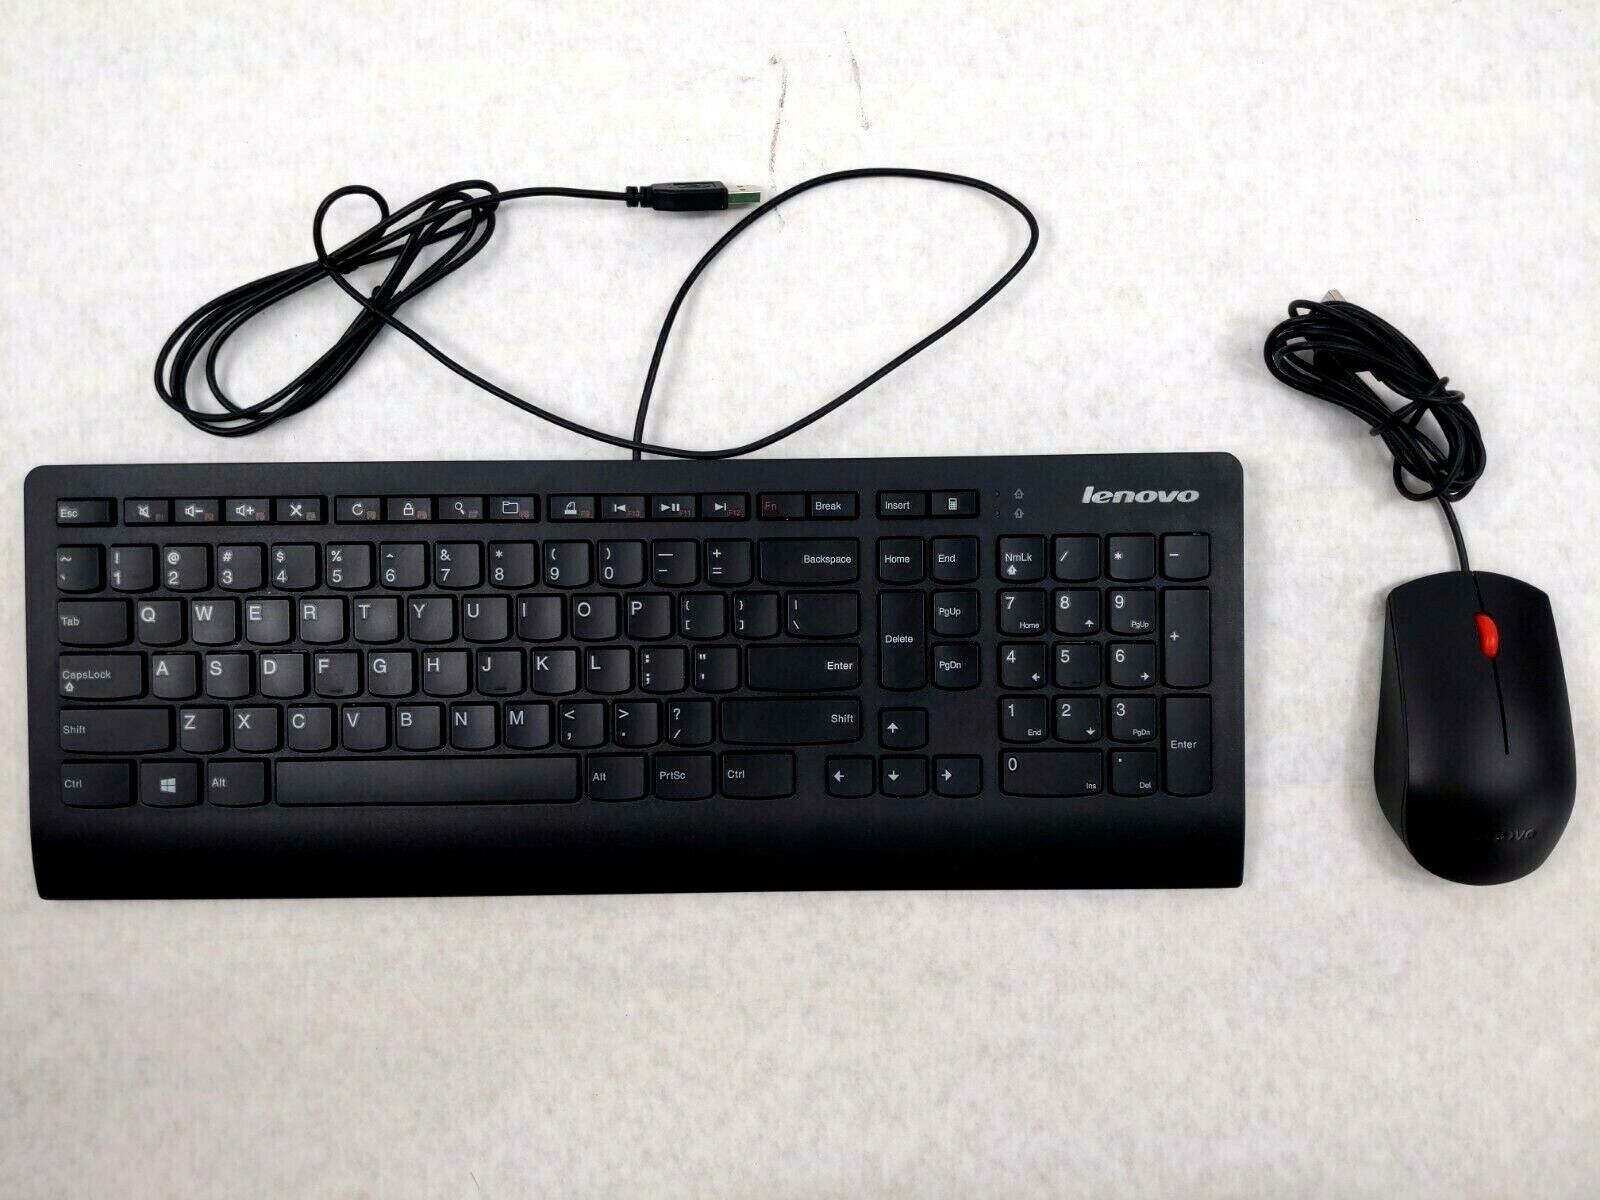 Lenovo SK-8821 Keyboard and SM-8823 Mouse Standard Keyboard/Mouse Lot